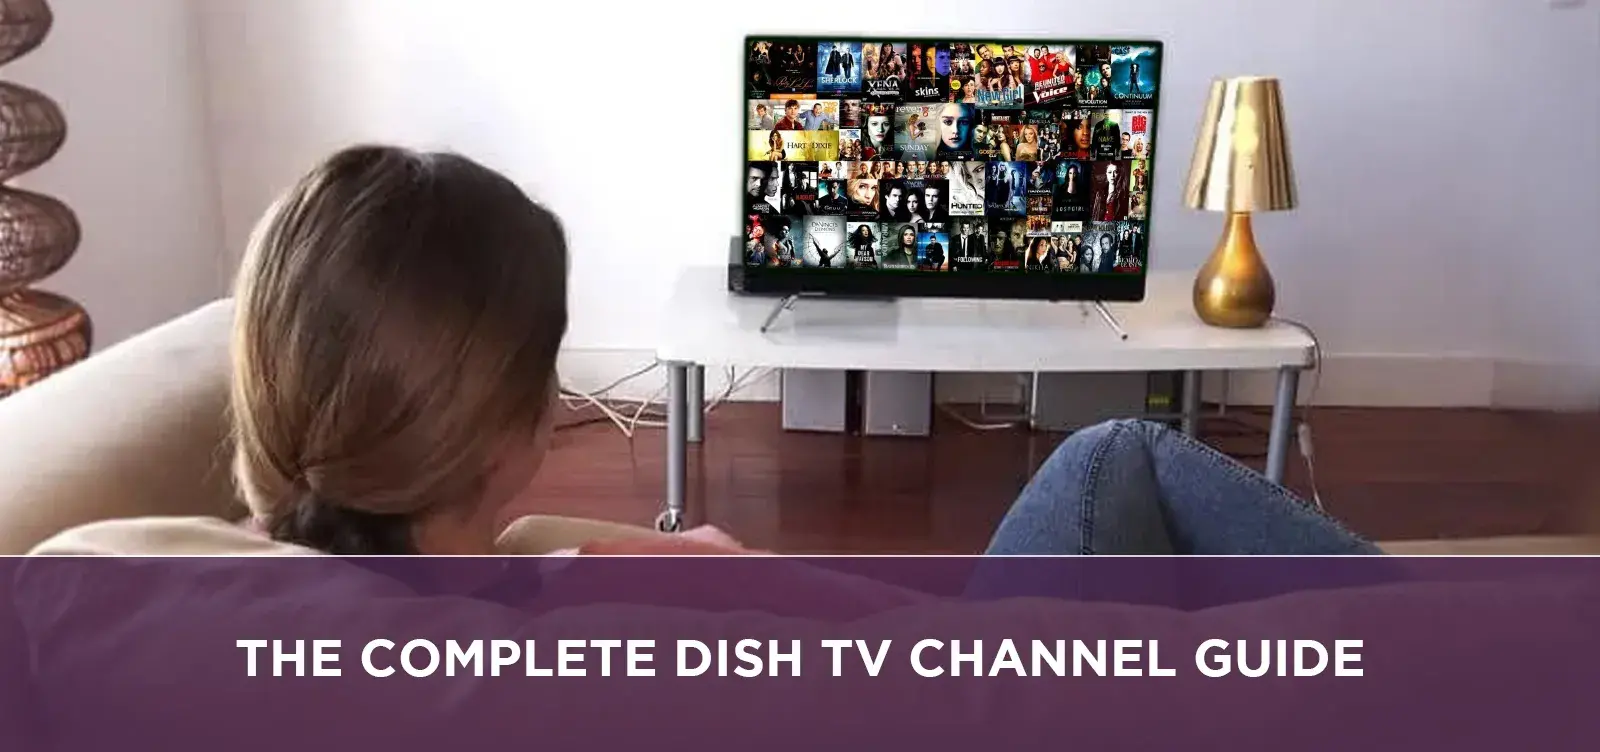 The Complete dish tv channel guide